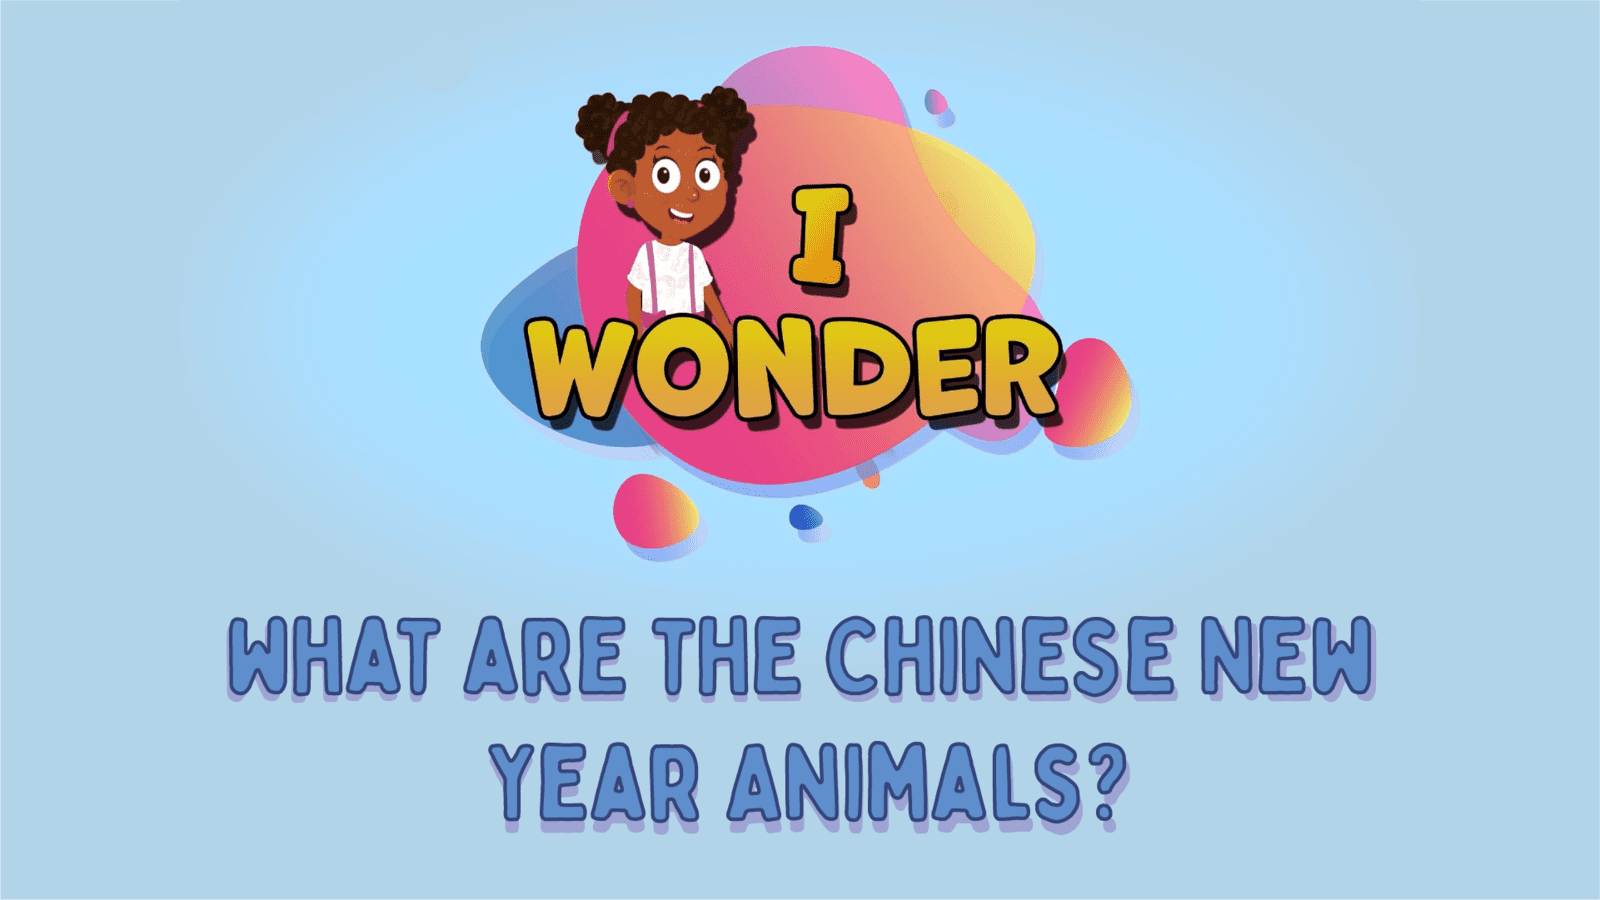 What Are The Chinese New Year Animals?